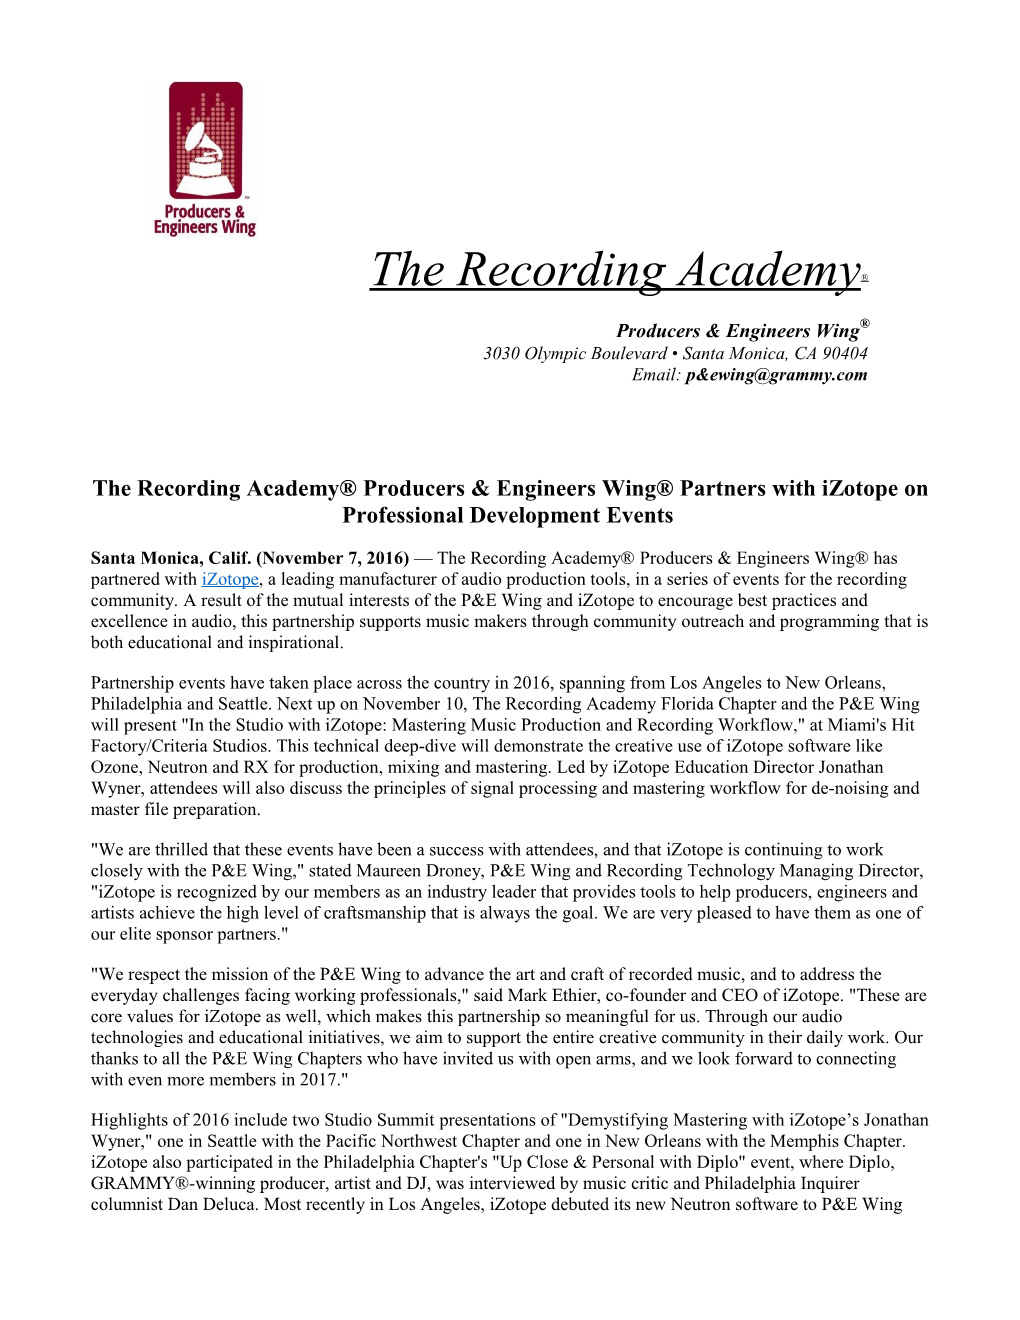 The Recording Academy Producers & Engineers Wing Partners with Izotope on Professional